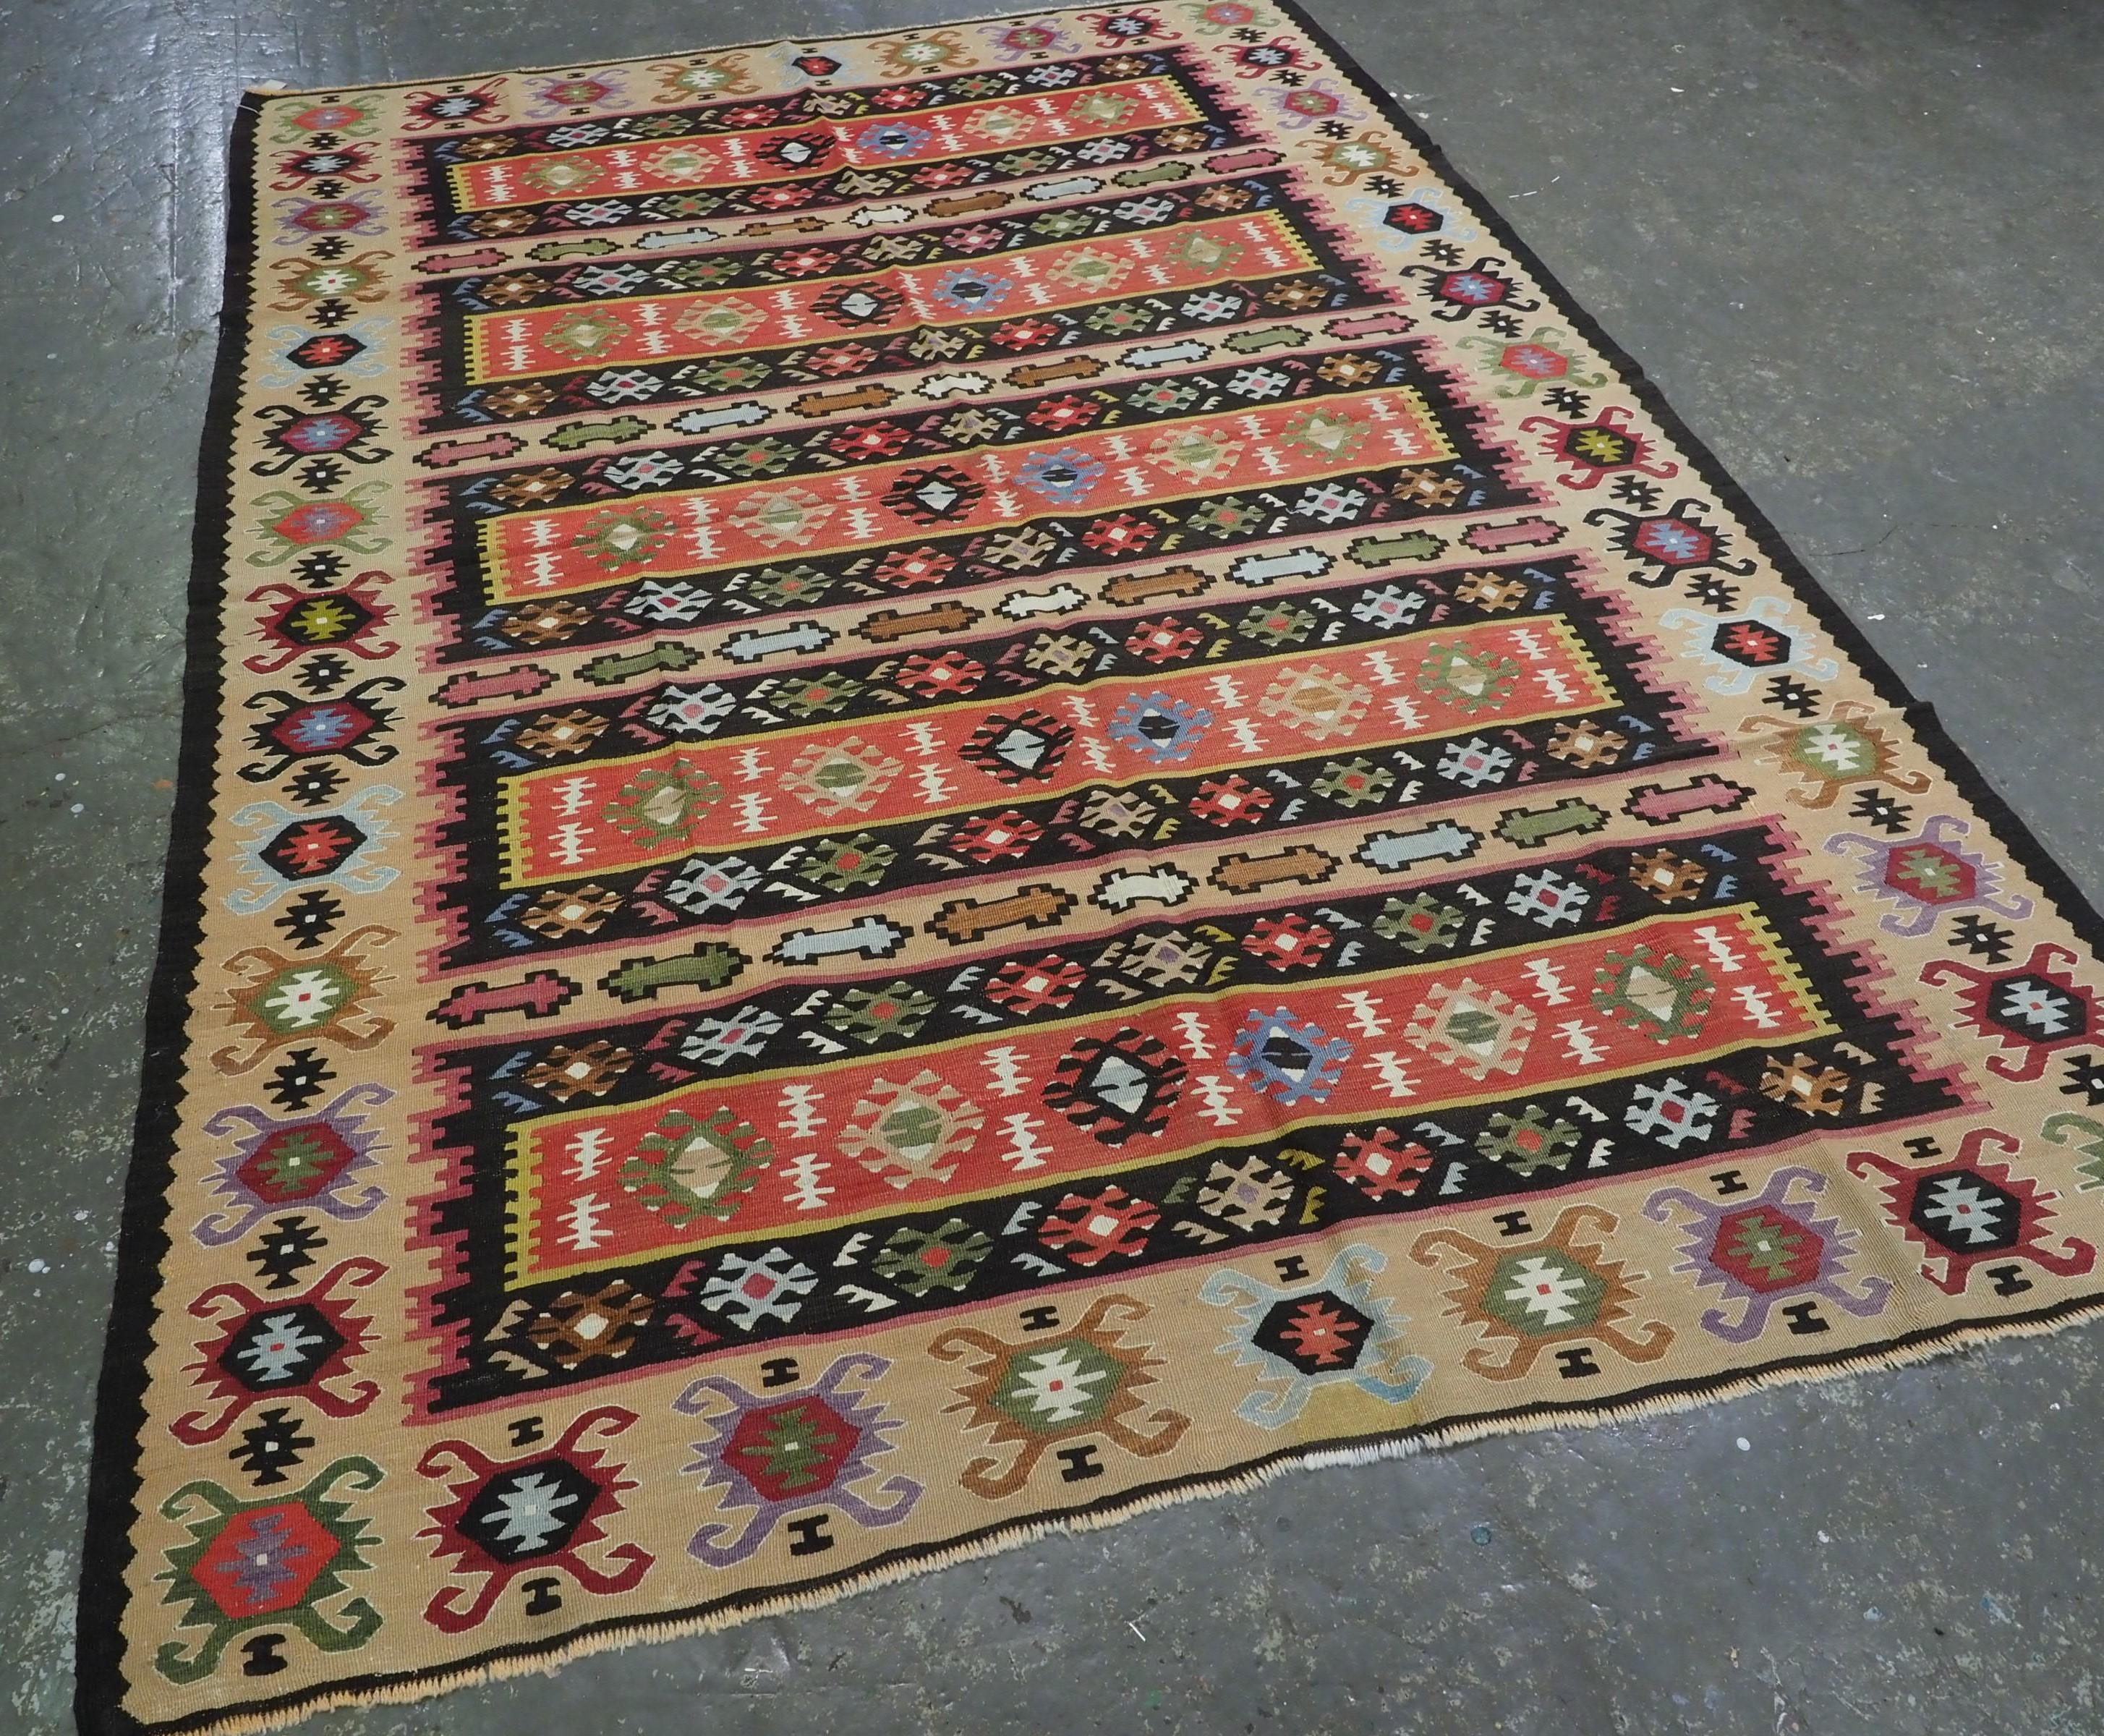 Size: 7ft 11in x 5ft 10in (243 x 179cm).

Antique Pirot / Sarkoy kilim of traditional banded design. A kilim with warm soft colours..

Circa 1920.

Pirot kilims are also known as Sarkoy or Sharkoy, they originate from the town of Pirot in